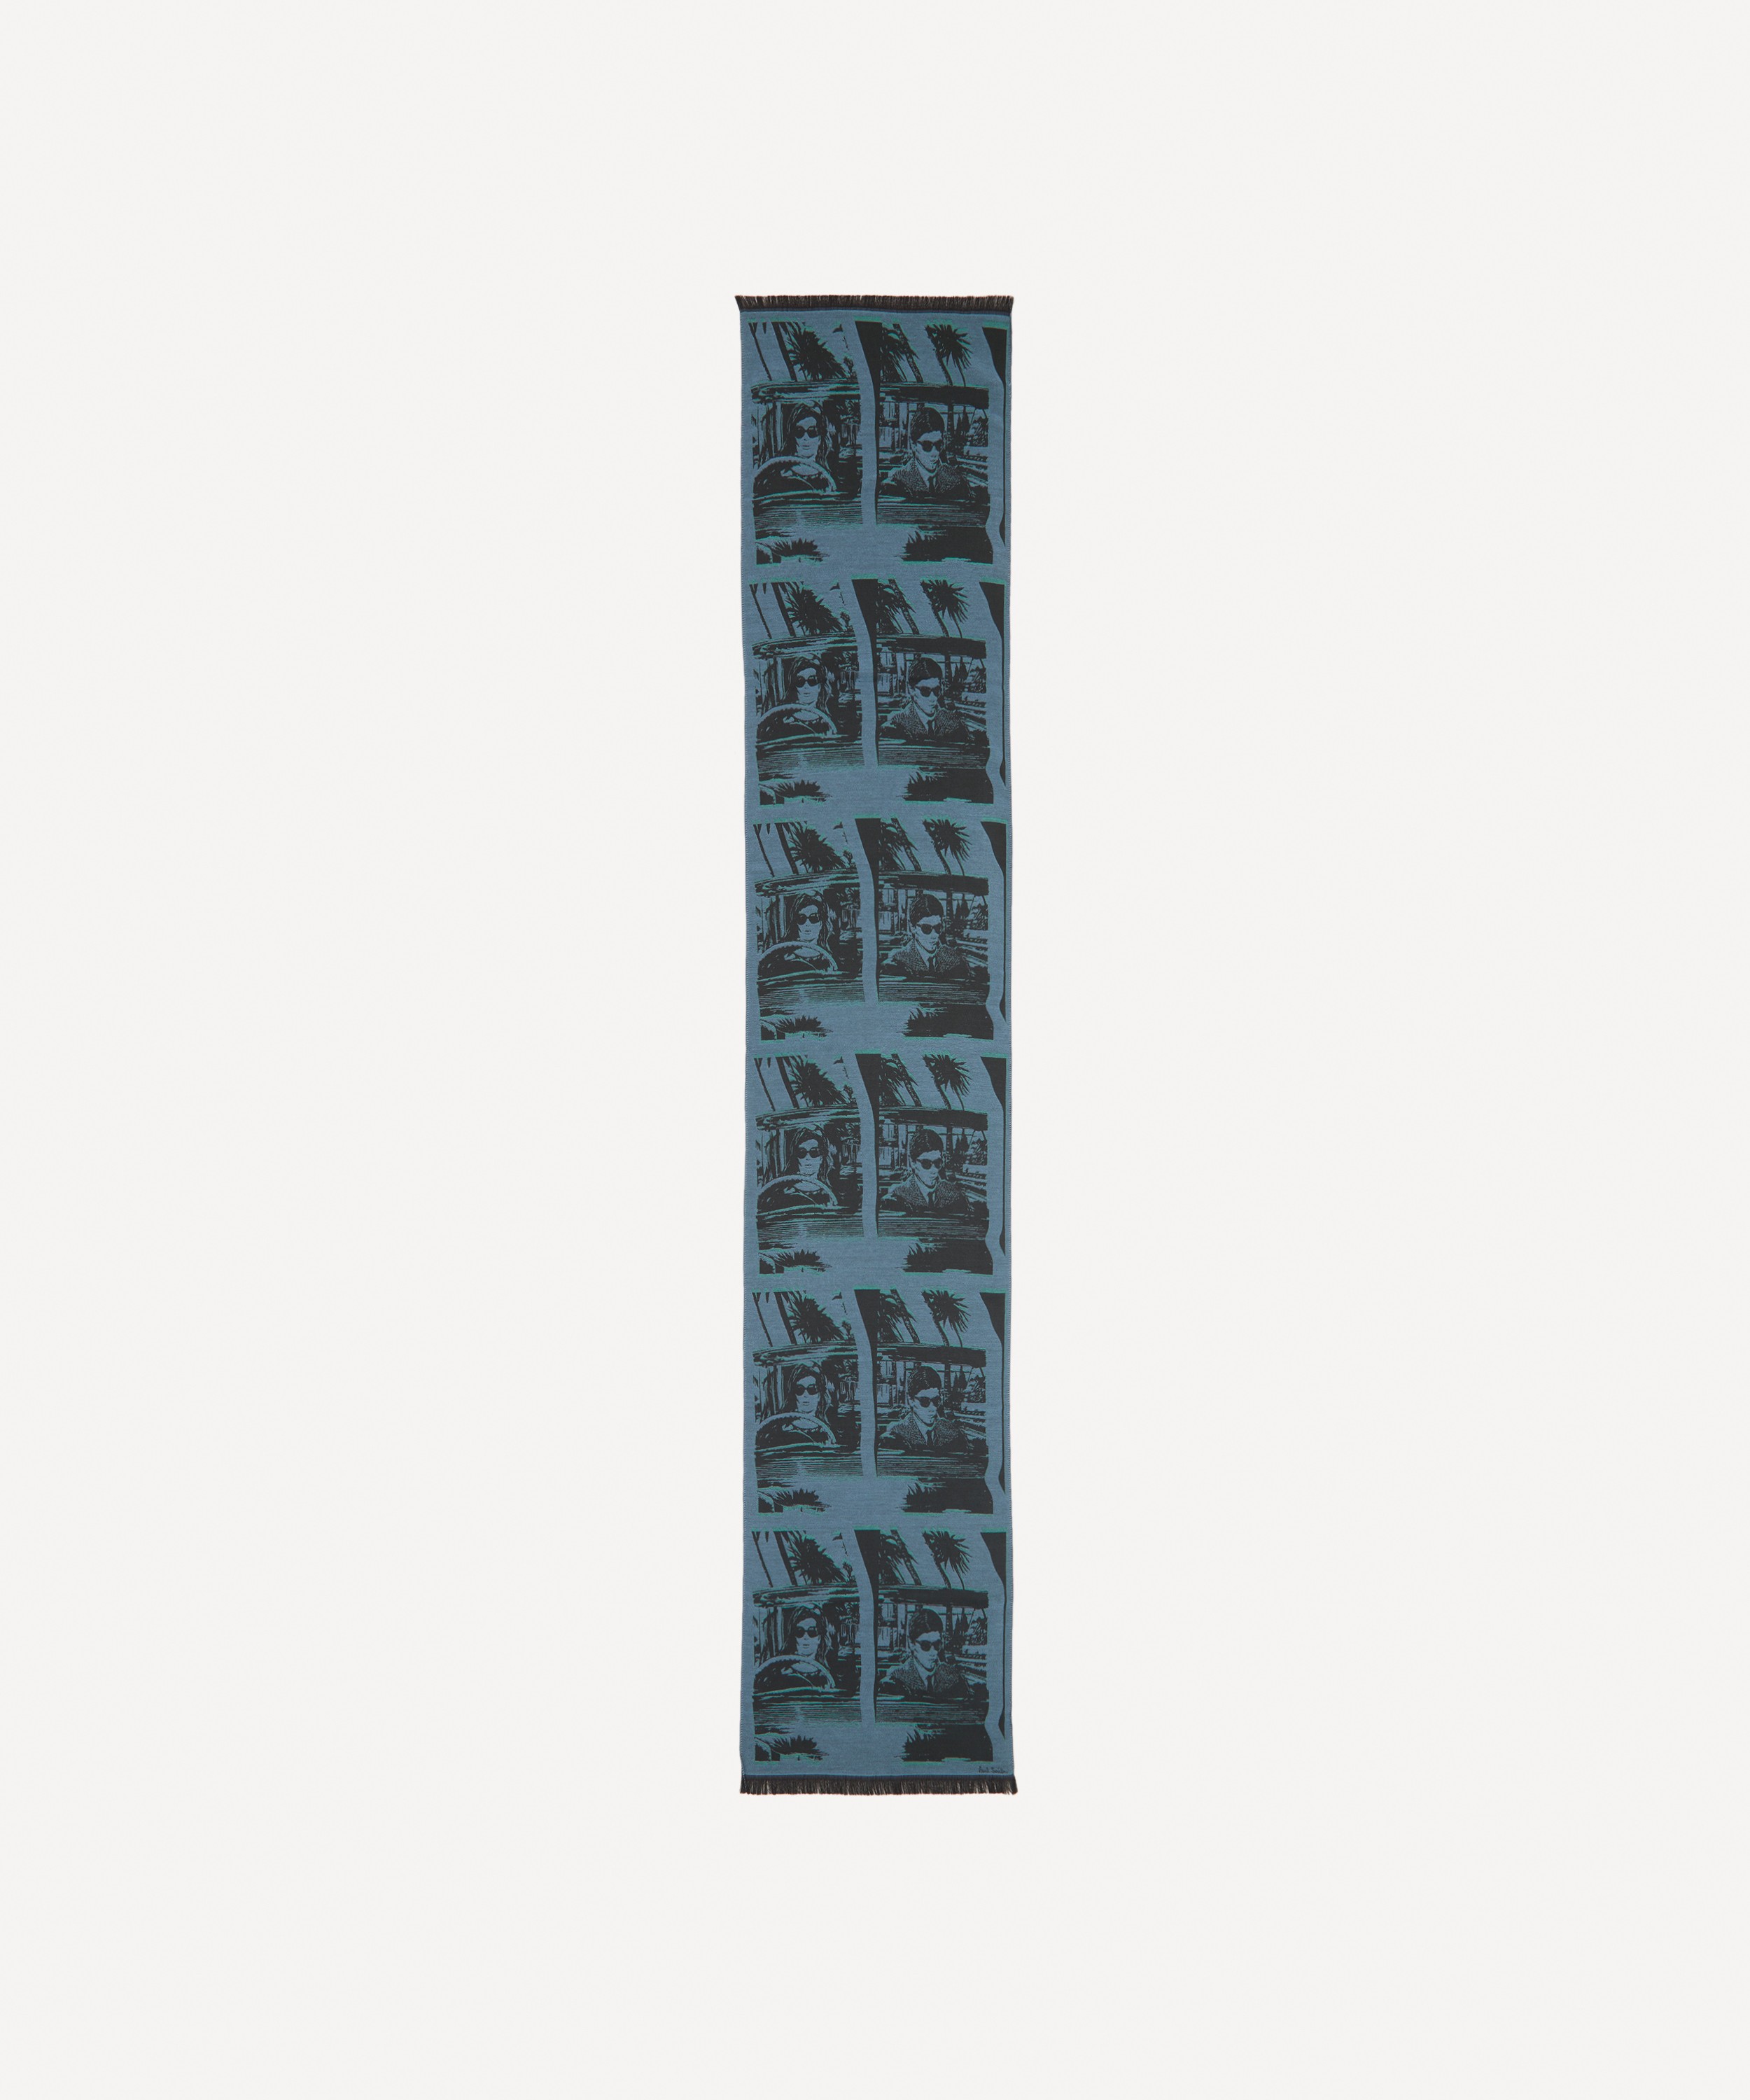 Paul Smith - Getaway Woven Scarf image number 2